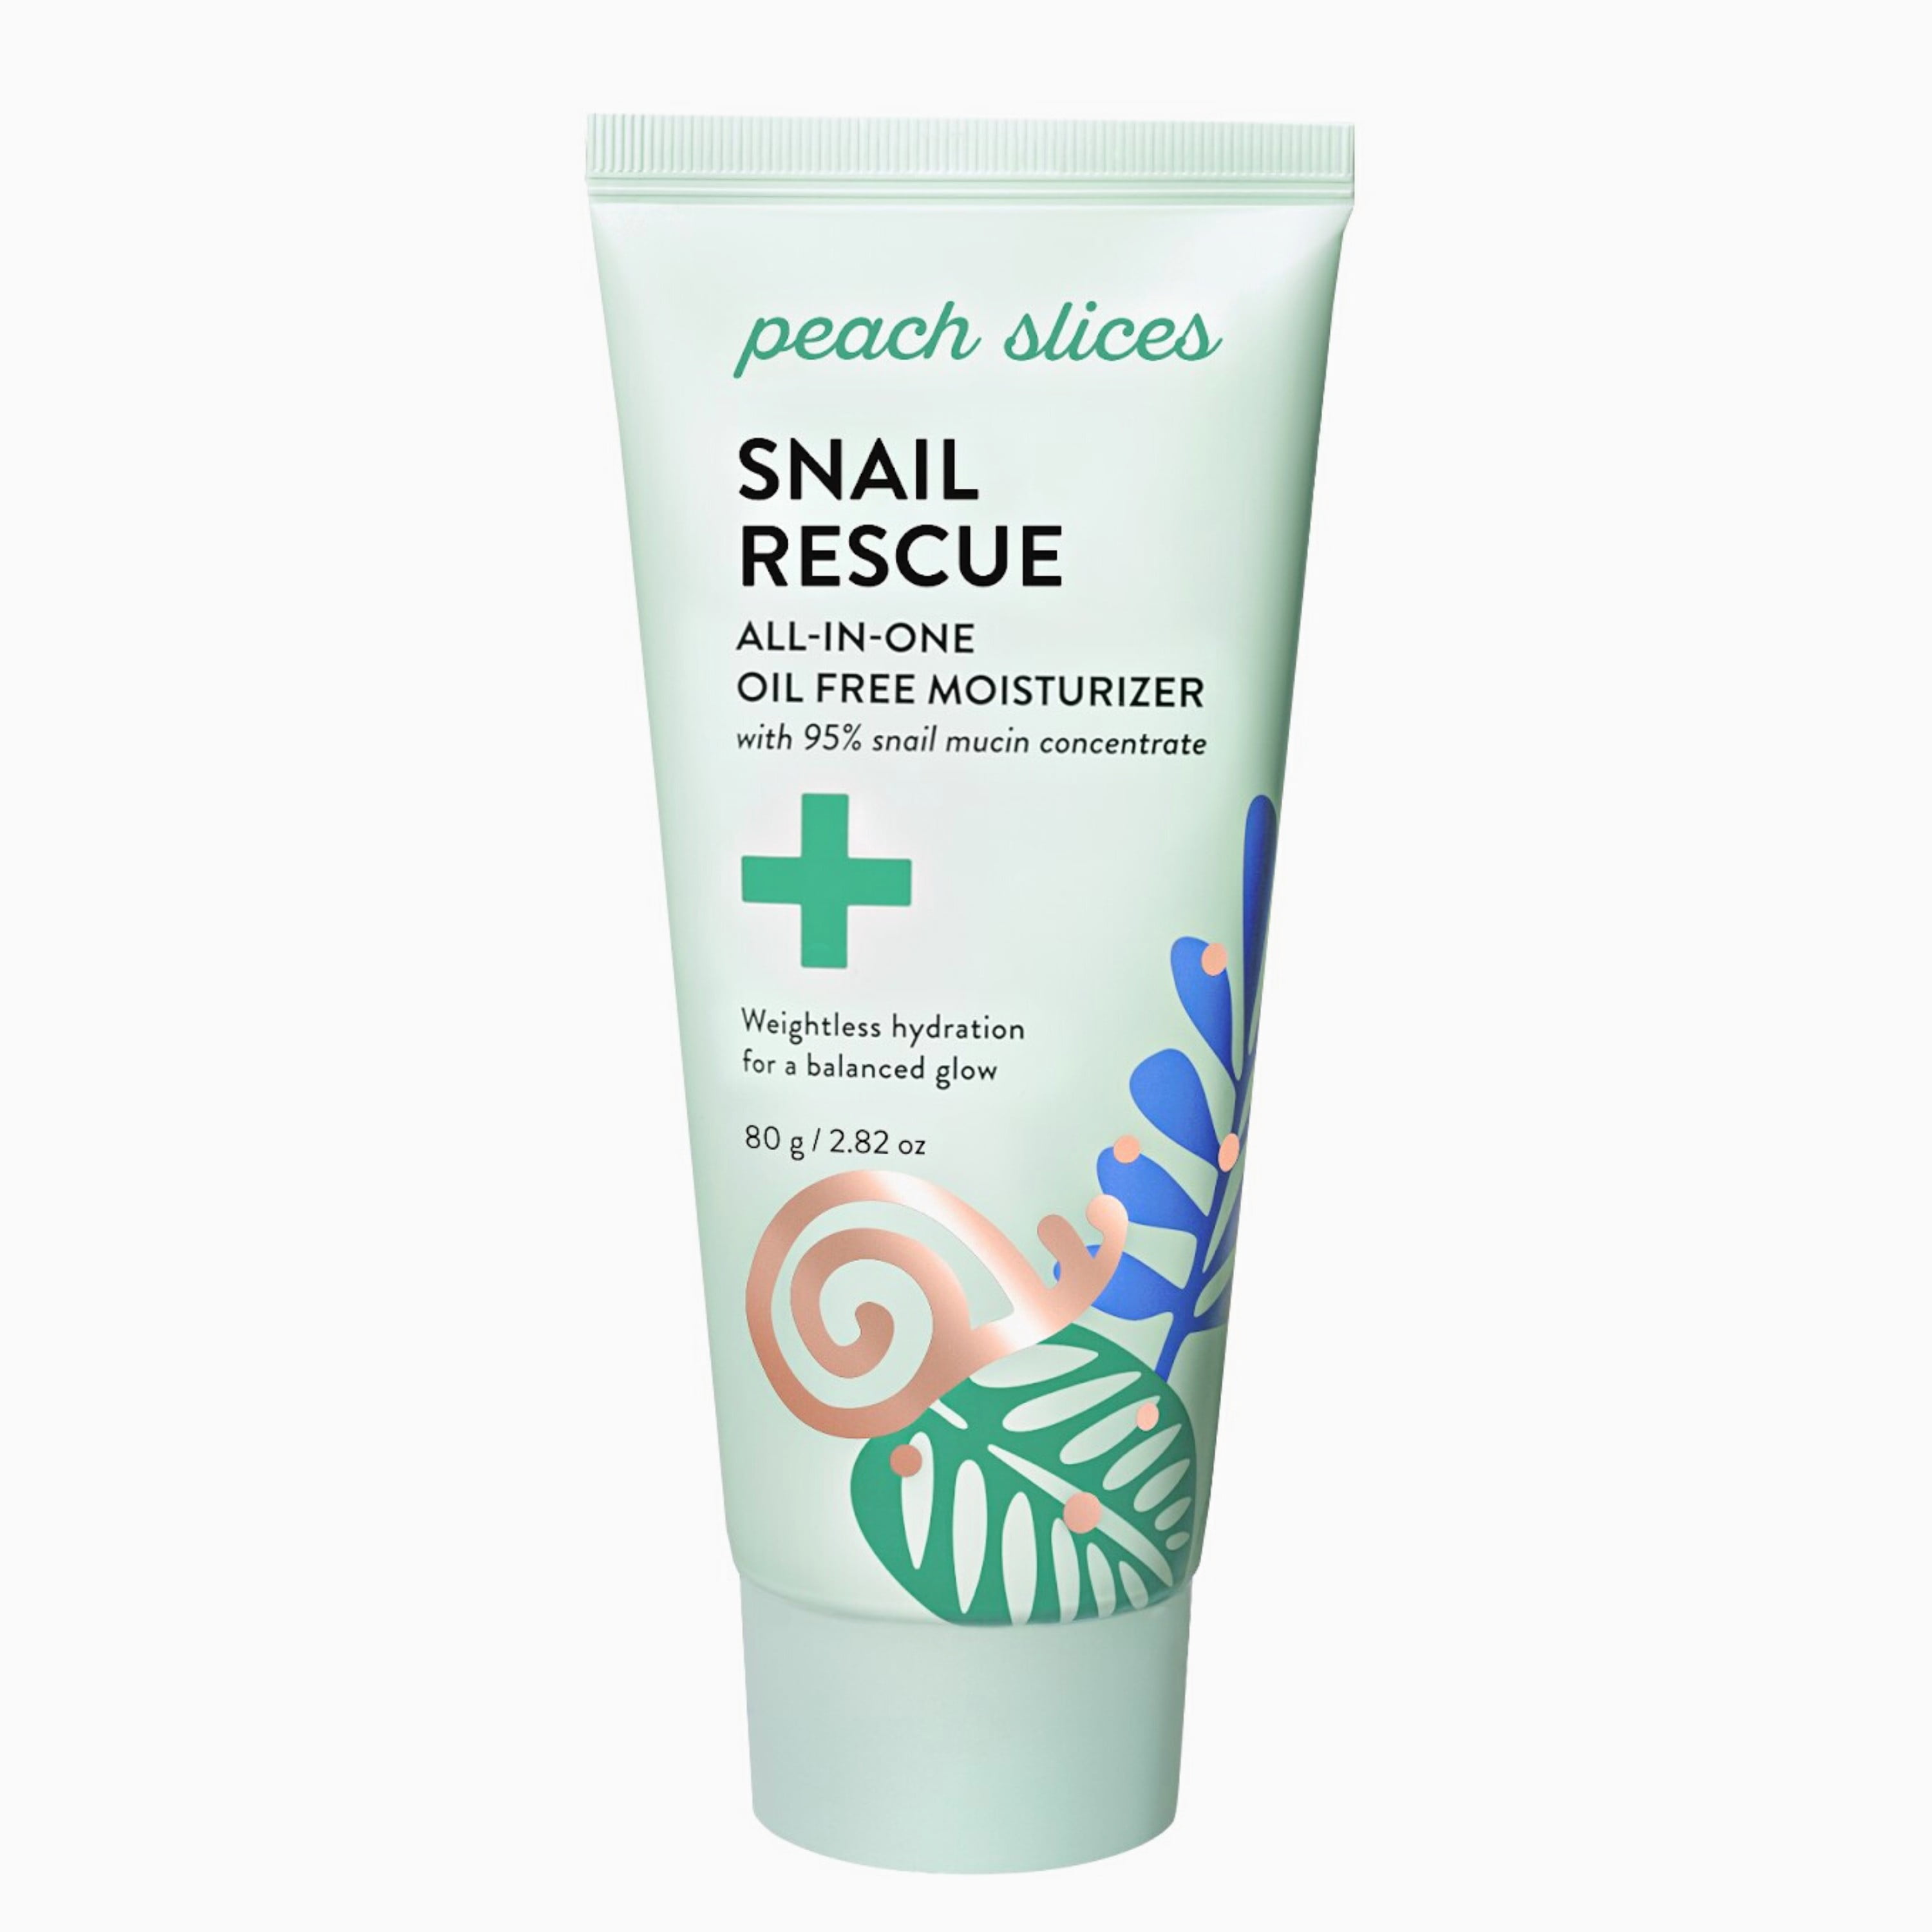 Peach Slices Snail Rescue All-in-One Oil Free Face Moisturizer with Snail Mucin, 3.83 fl oz